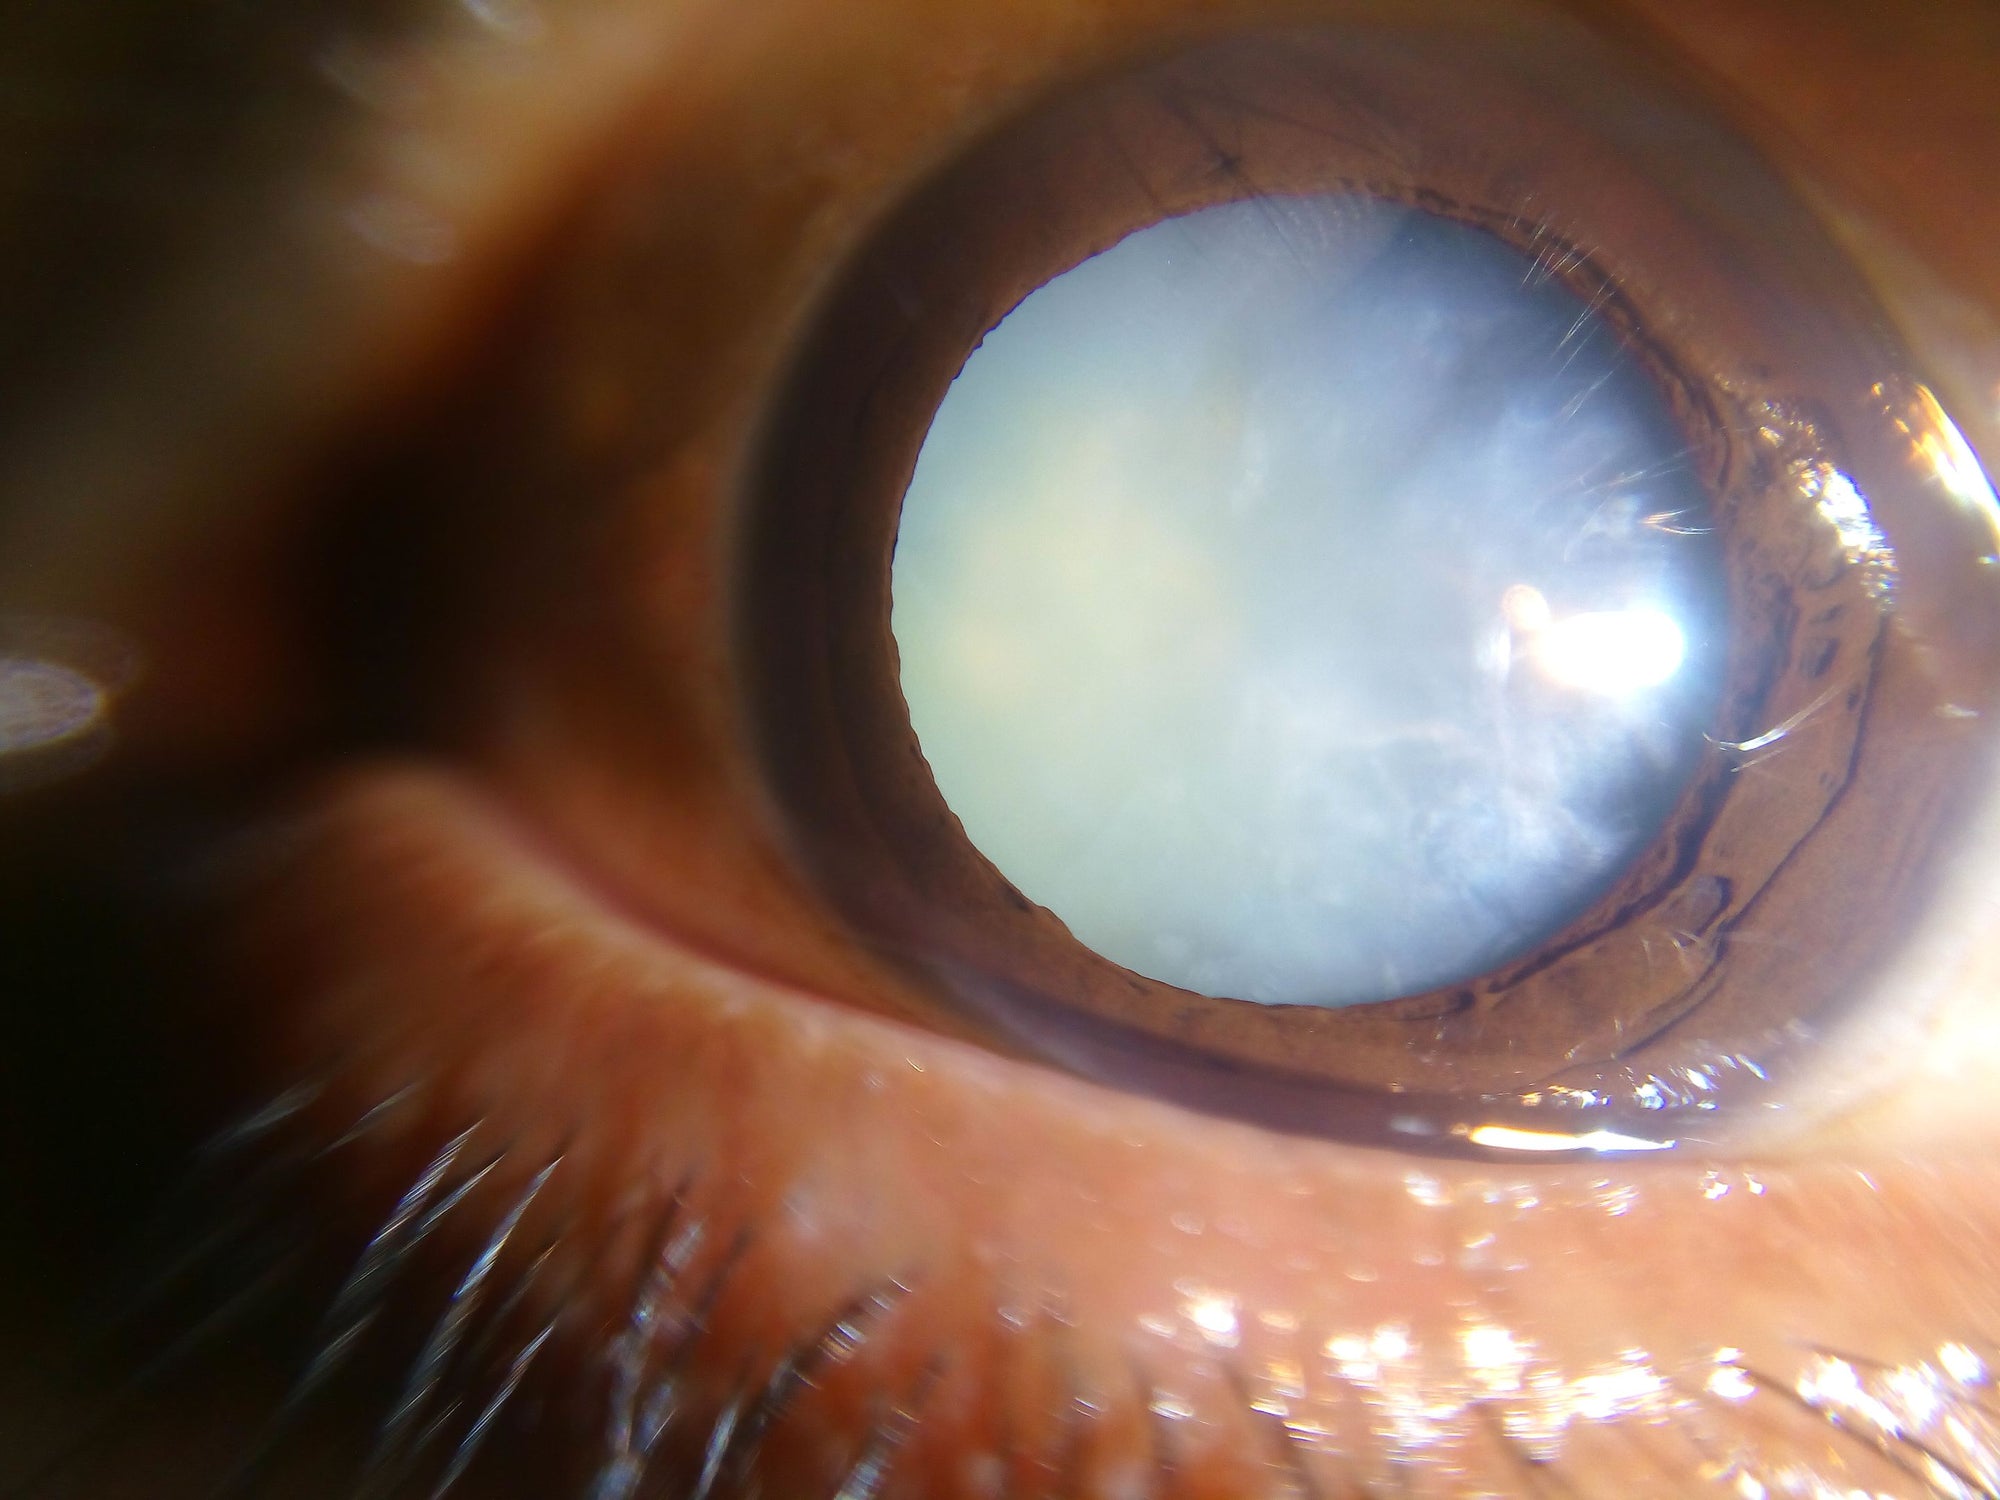 Should you choose a premium lens for your cataract surgery?